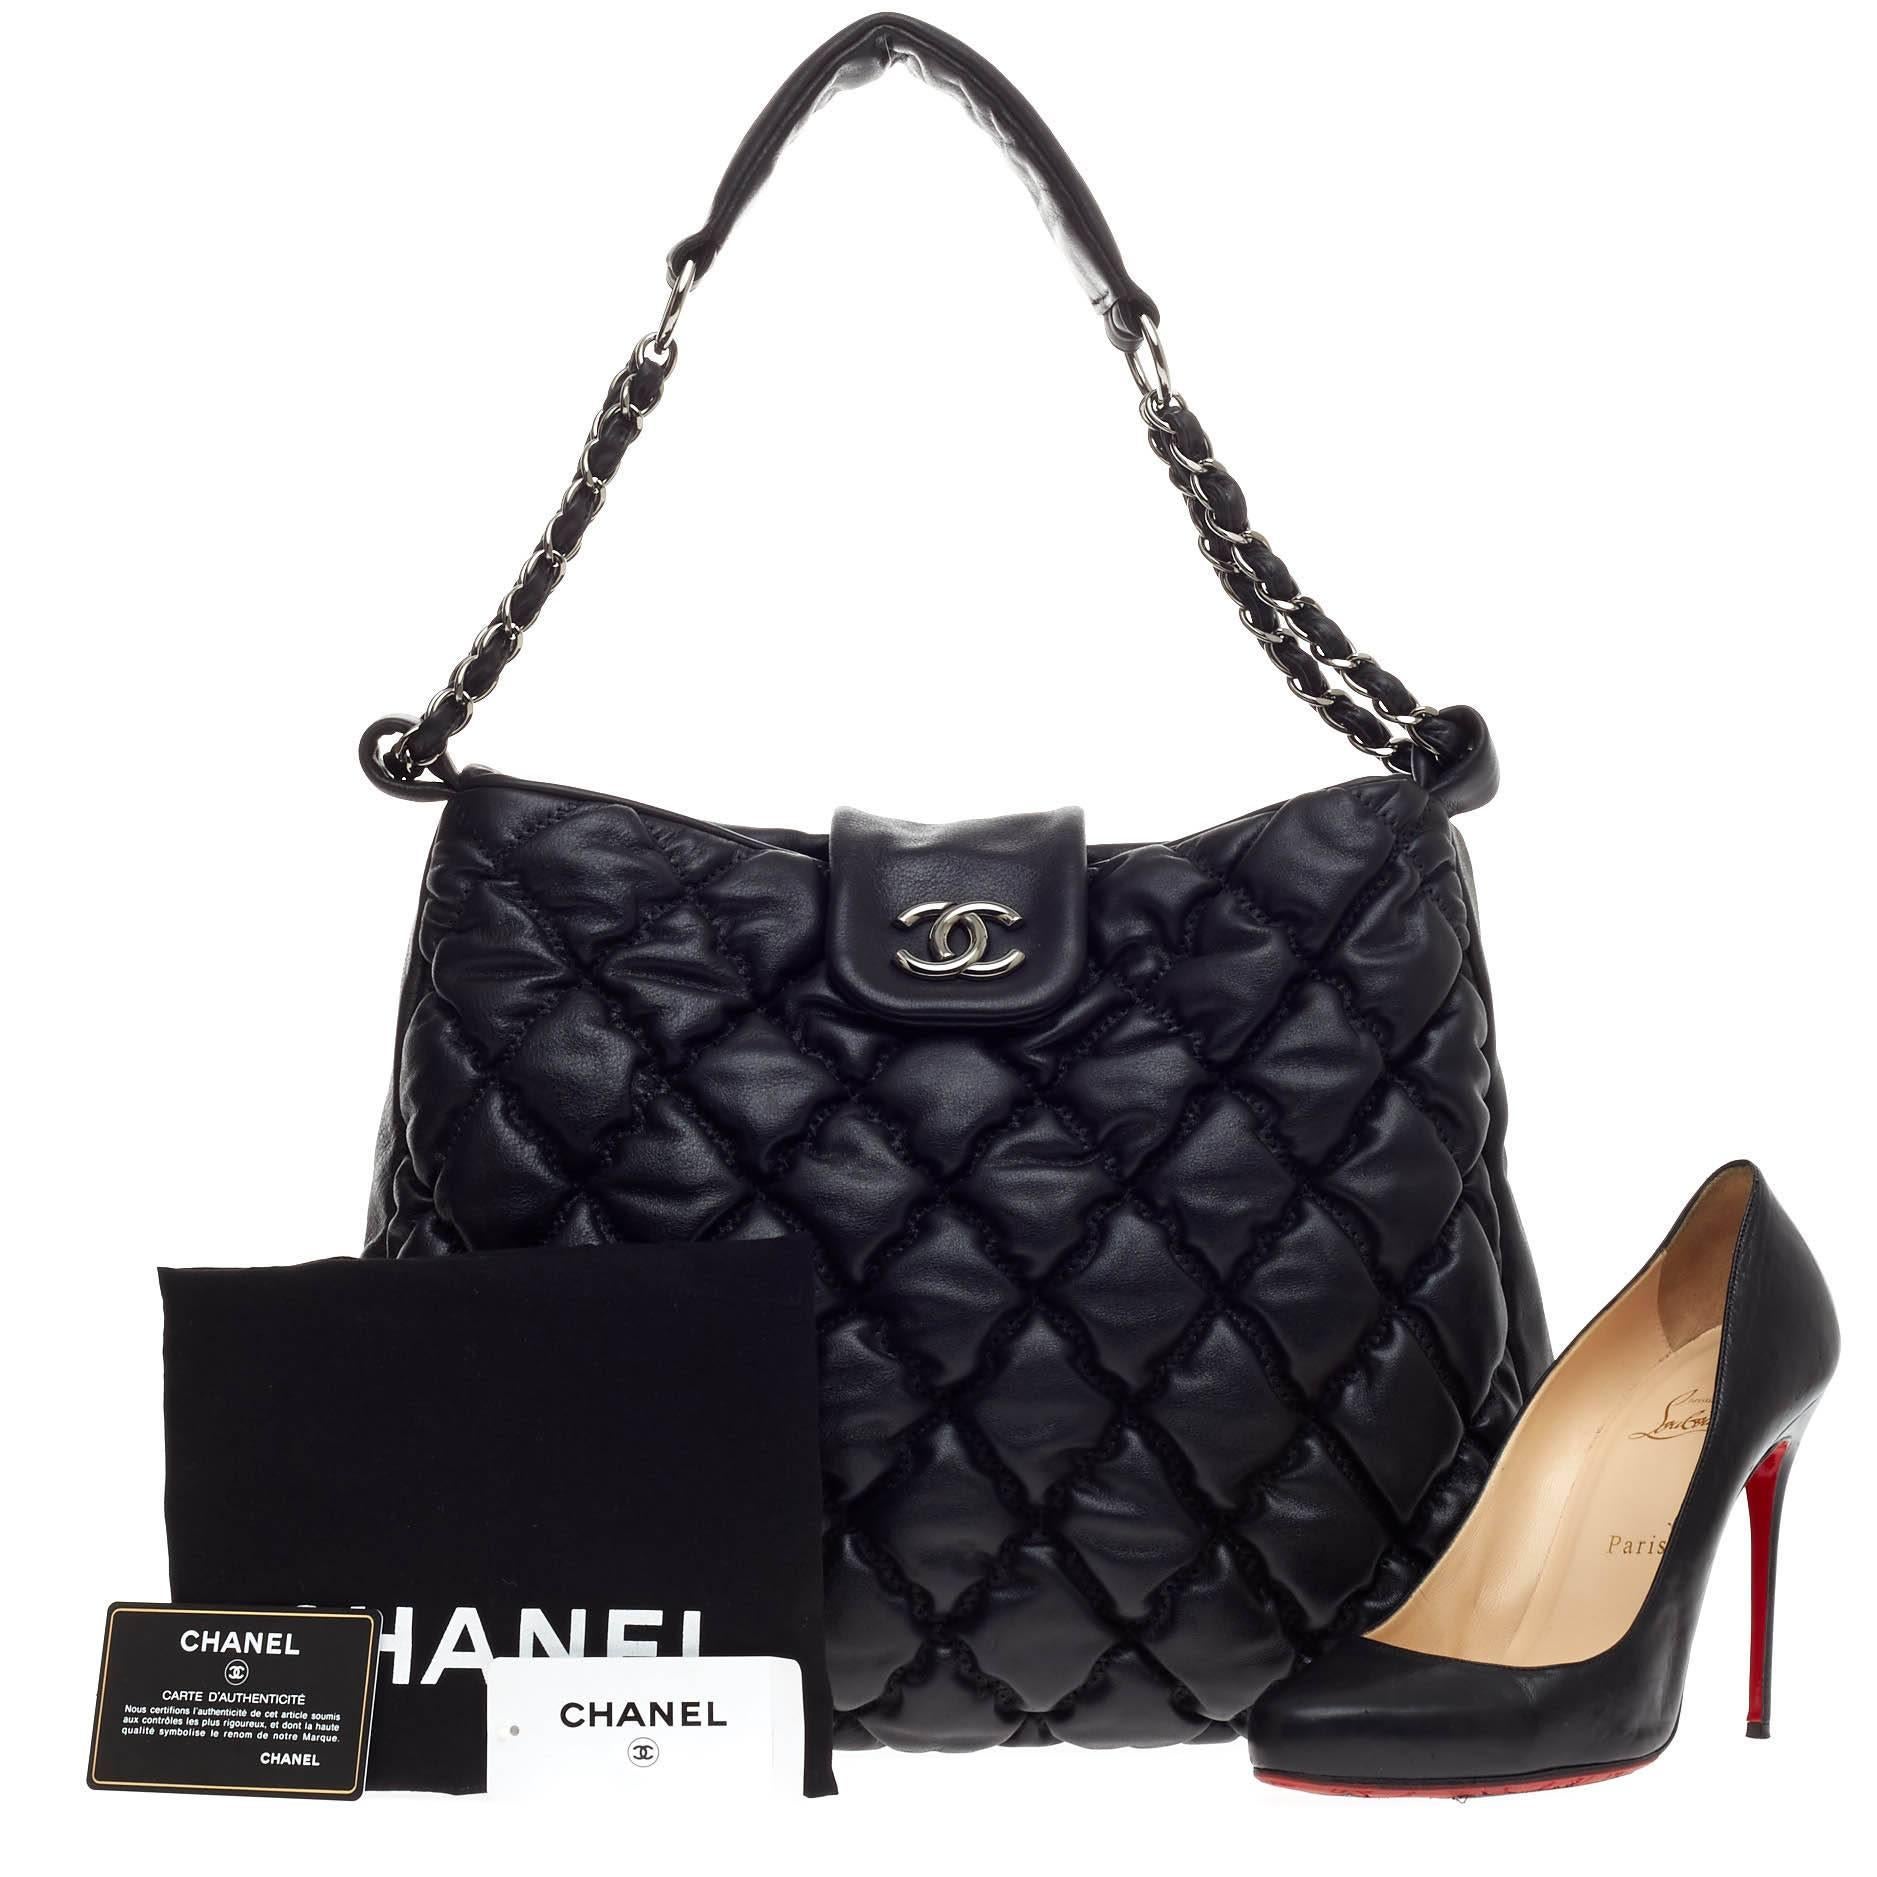 This authentic Chanel Bubble Hobo Quilted lambskin Large is sure to compliment just about every casual outfit. Crafted from classic black lambskin leather in modern bubble quilting, this soft, puffy bag features woven-in leather chain straps with